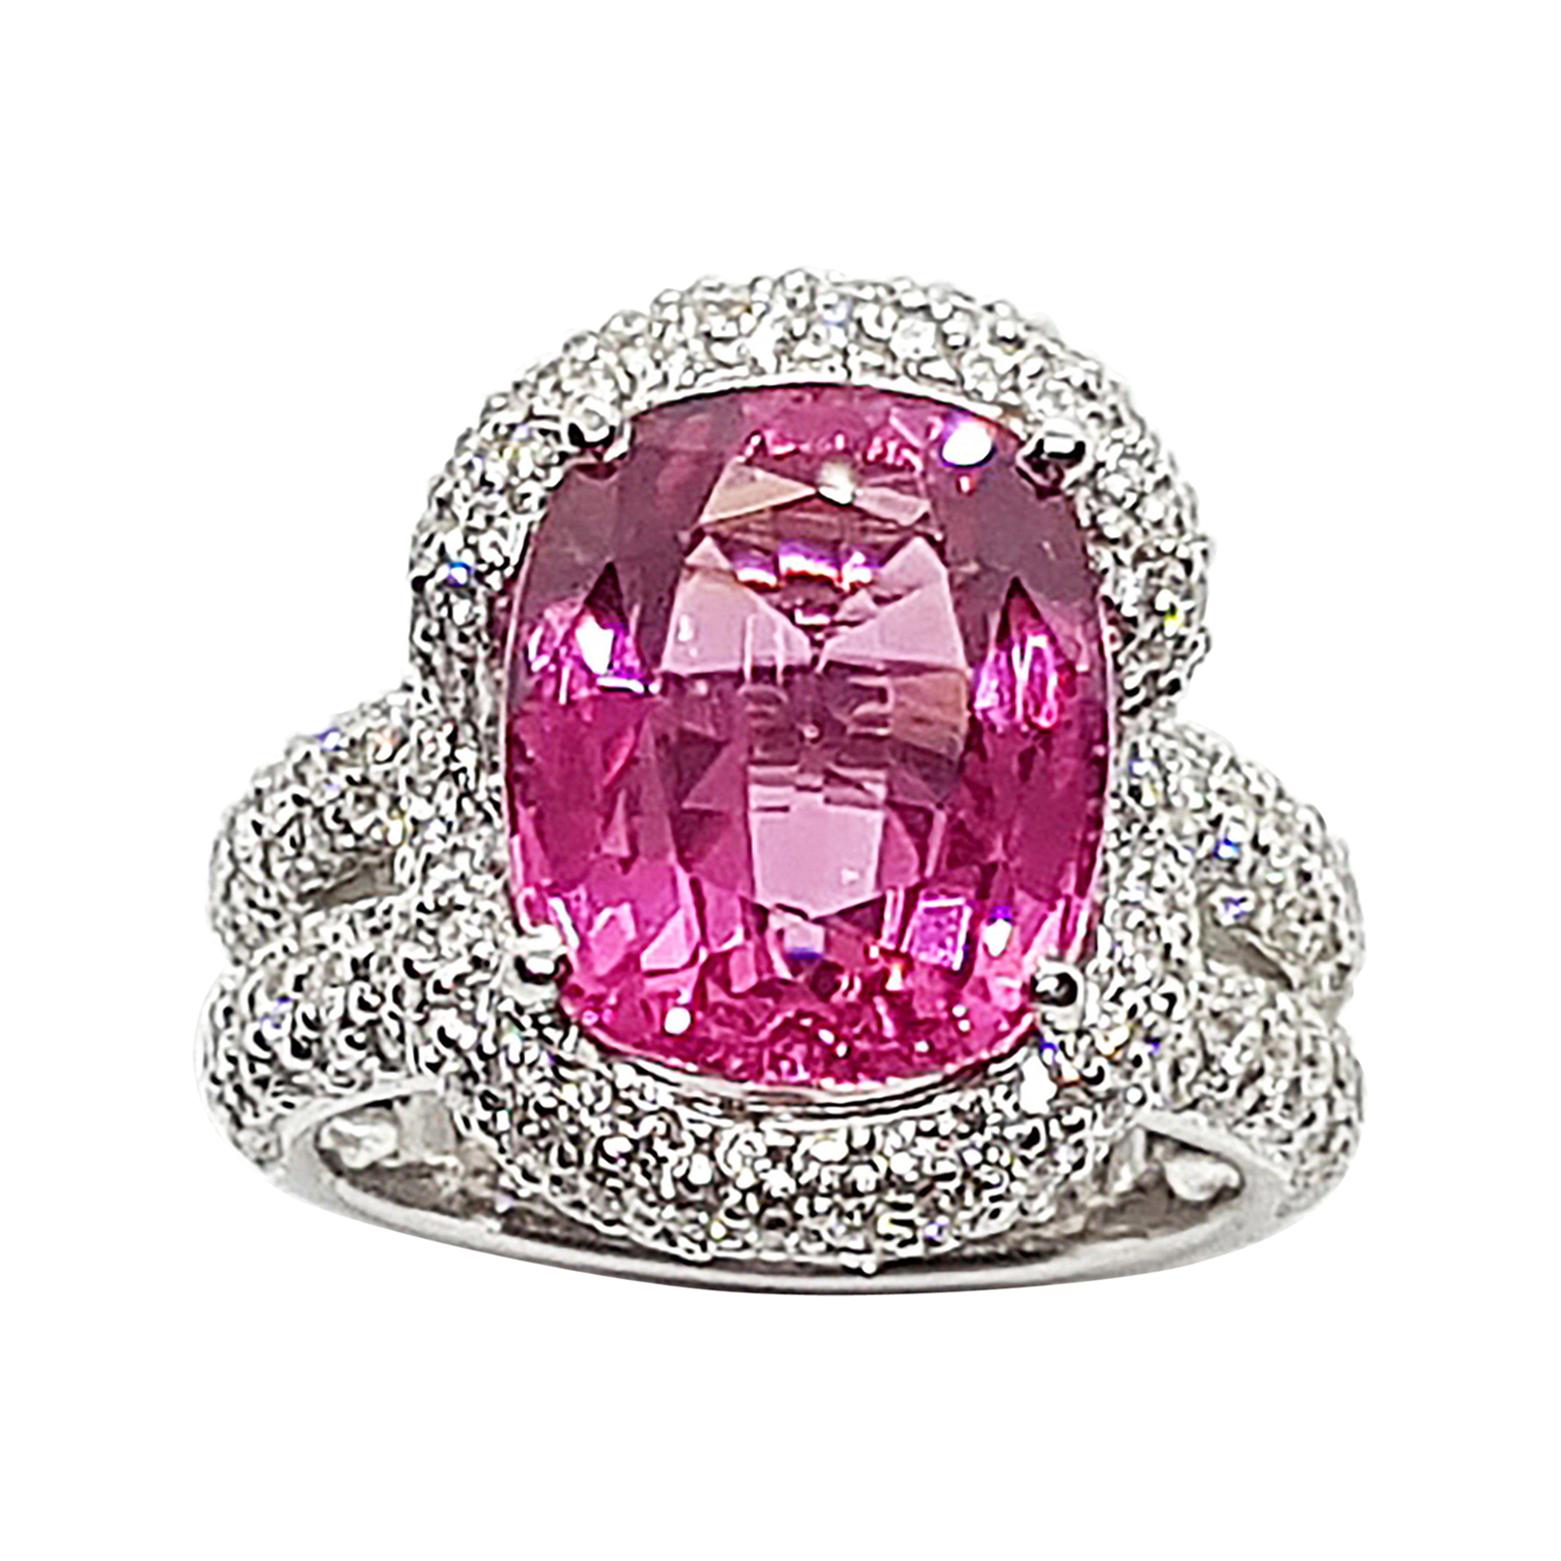 GIA Certified Unheated 5cts Spinel with Diamond Ring Set in 18 Karat White Gold 